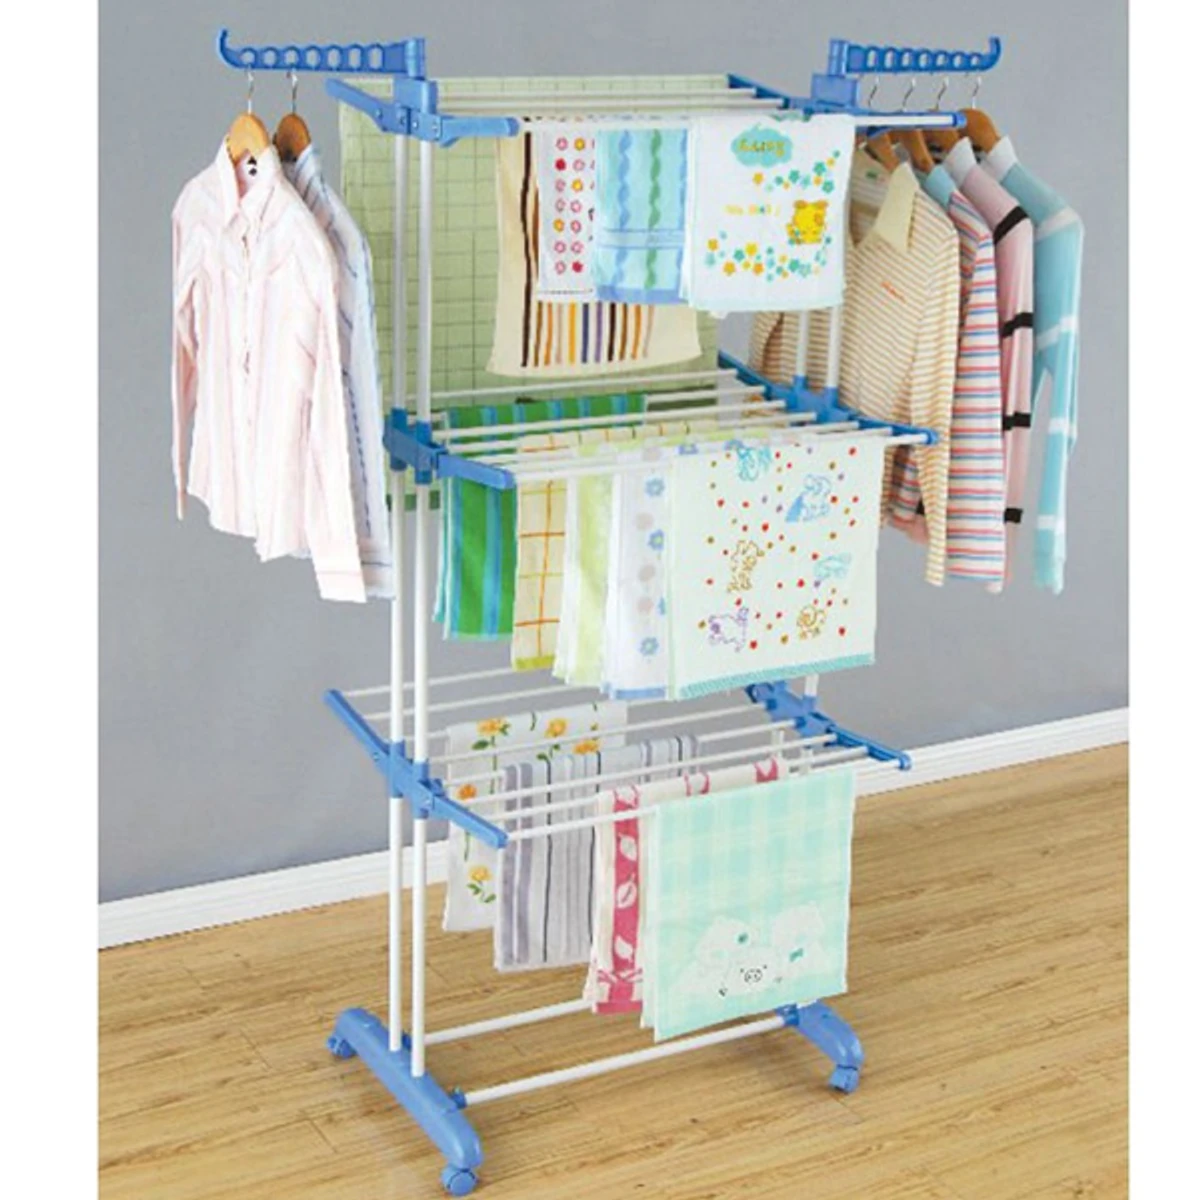 3 Tier Foldable Drying Rack Cloth Laundry Hanger - Silver and Blue